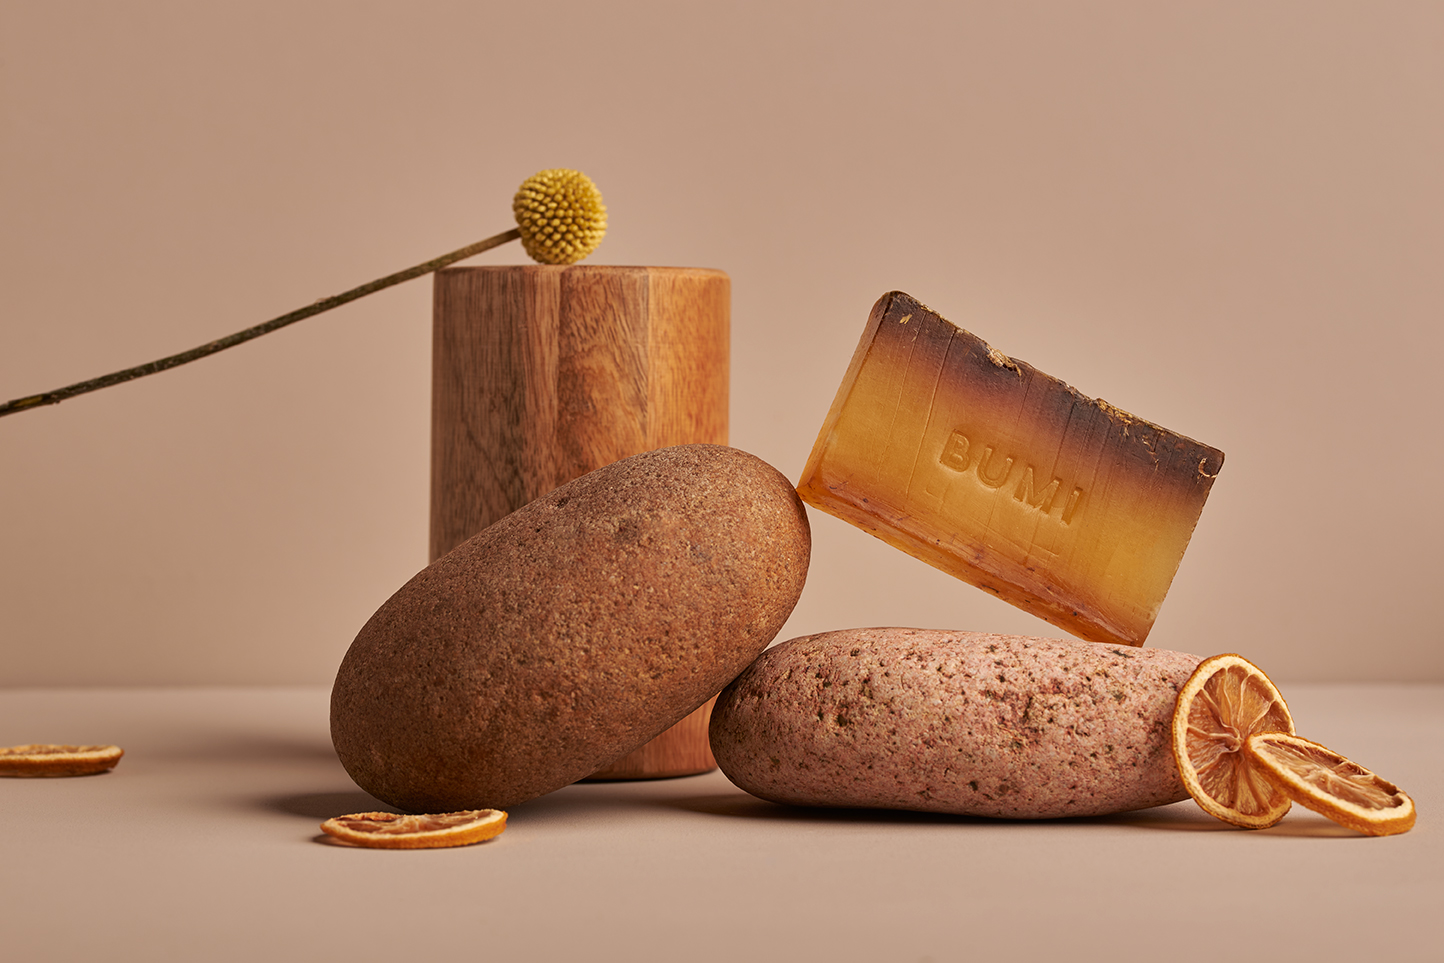 Soap bar on a beige background, placed on a stone with the ingredients next to it.